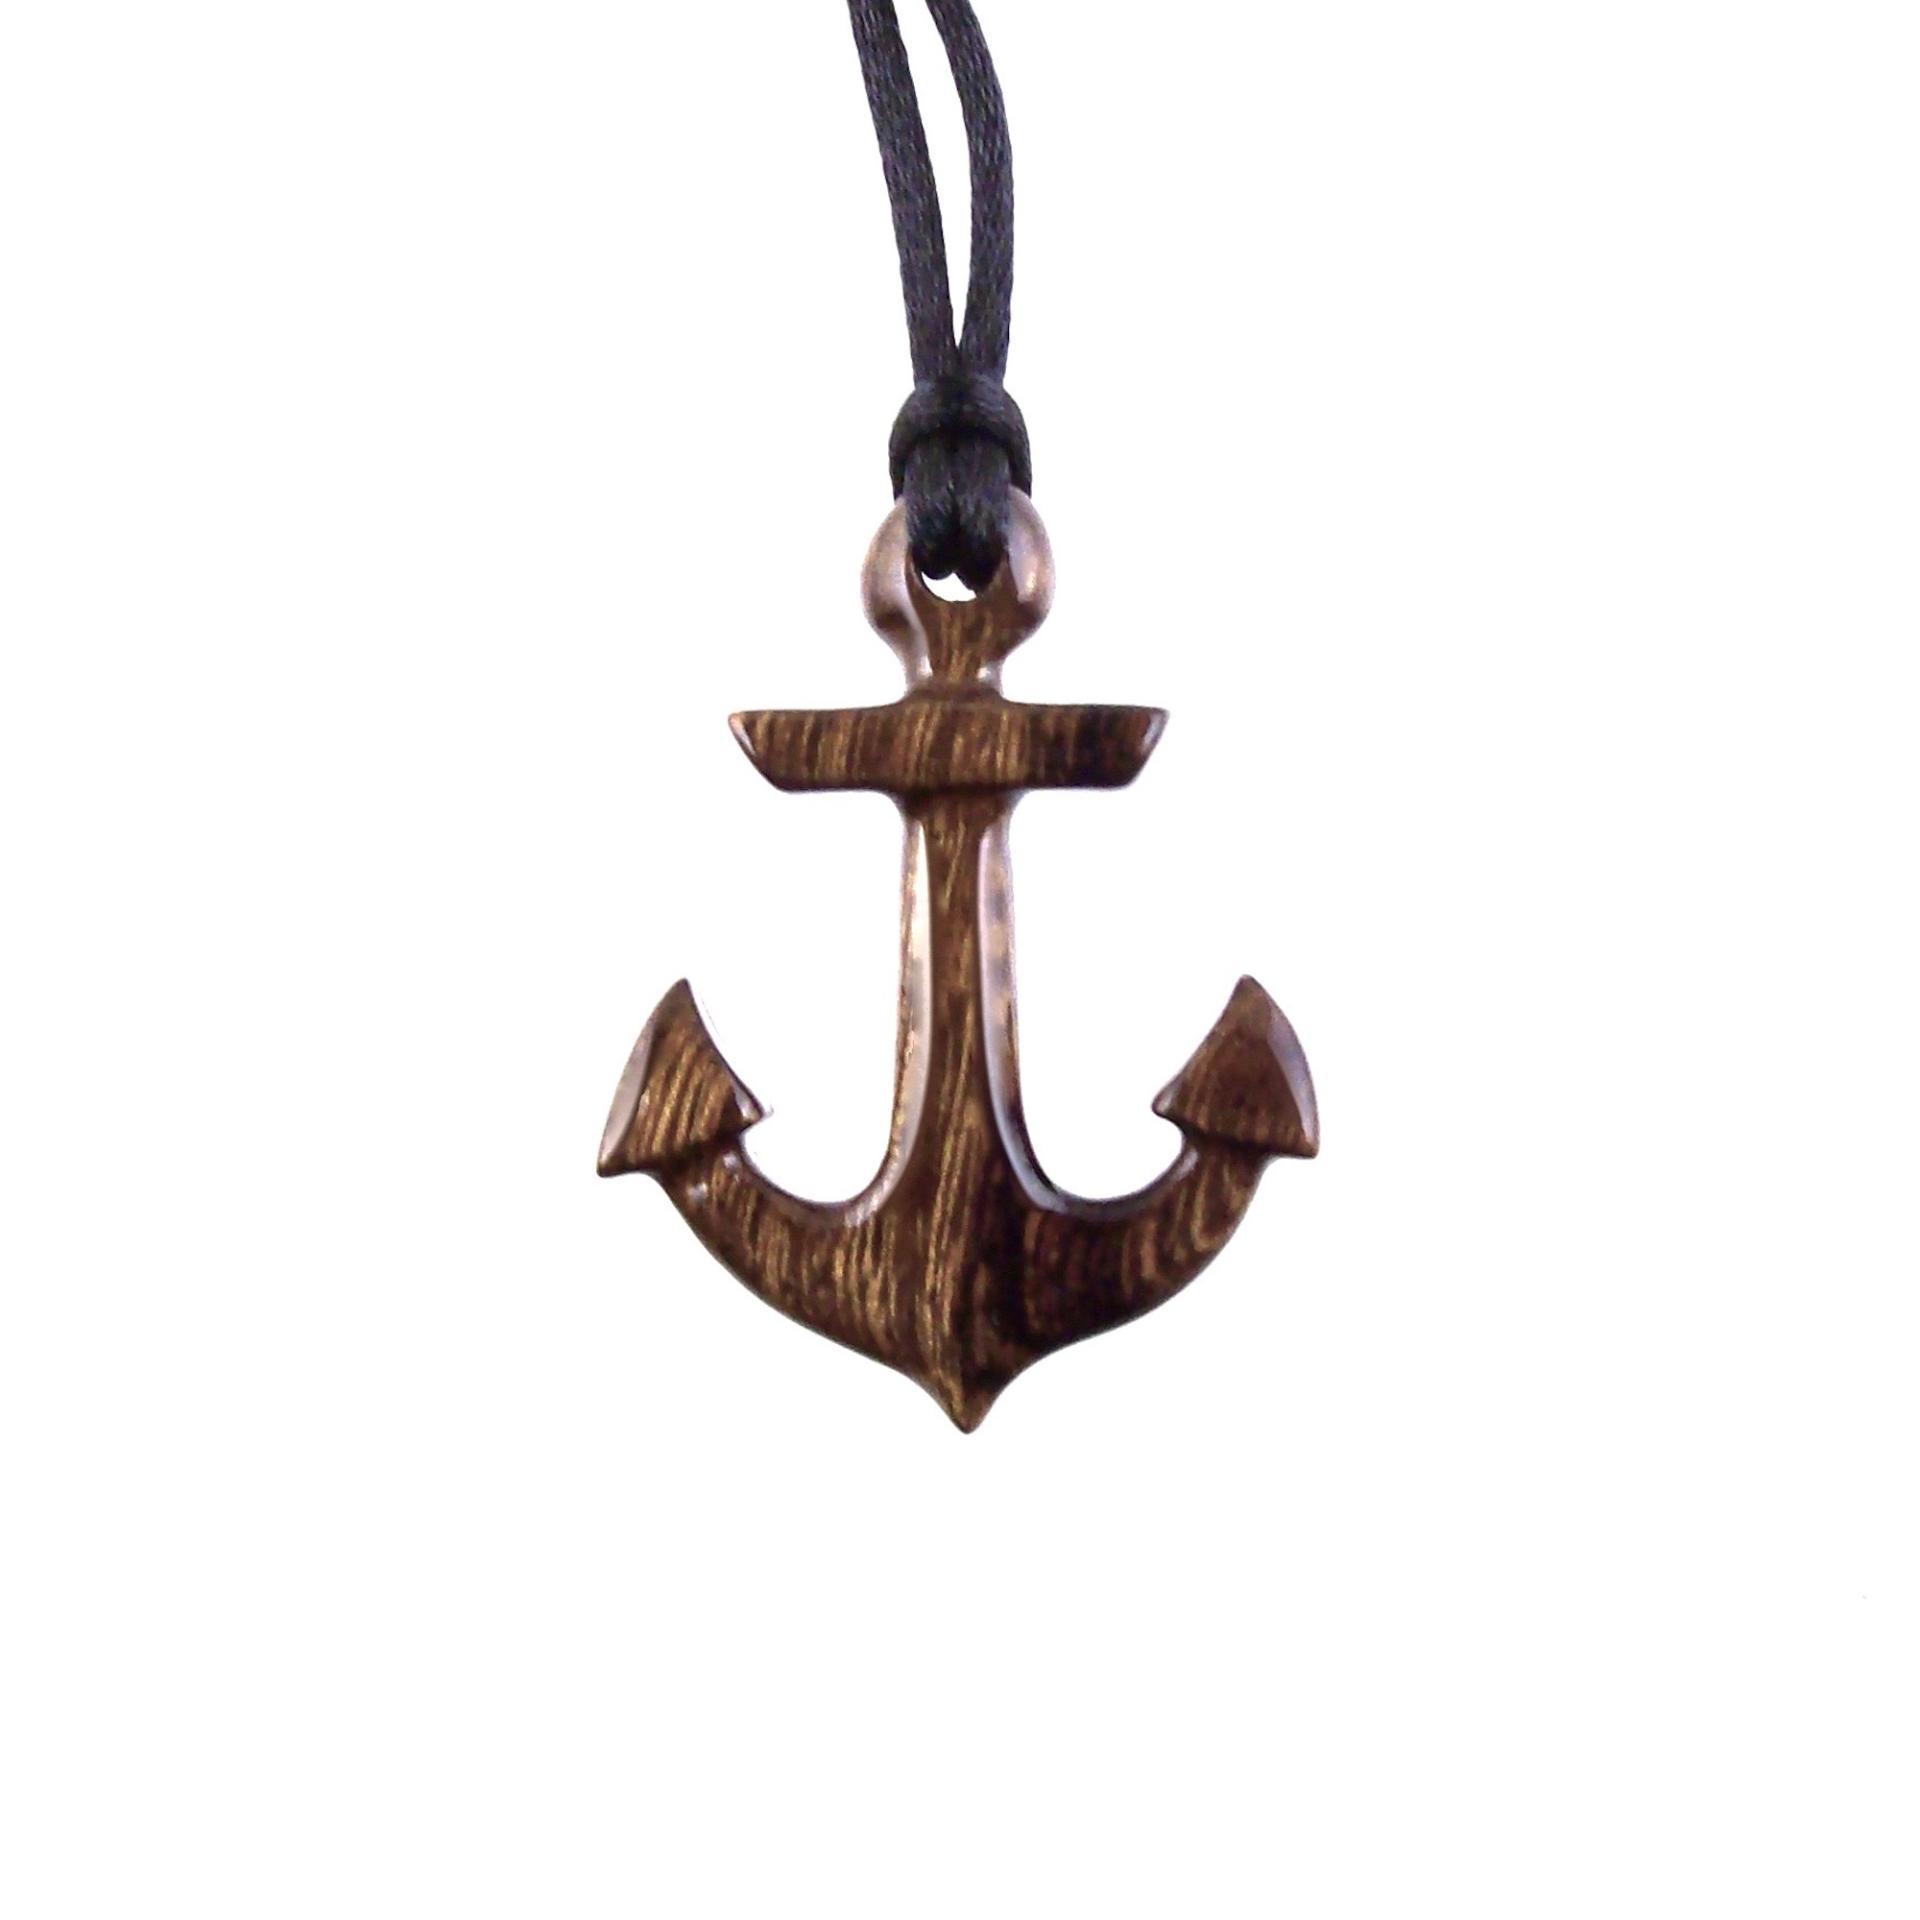 Hand Carved Anchor Necklace, Wooden Anchor Pendant, Mens Wood Necklace, Handmade Nautical Jewelry, Gift for Him